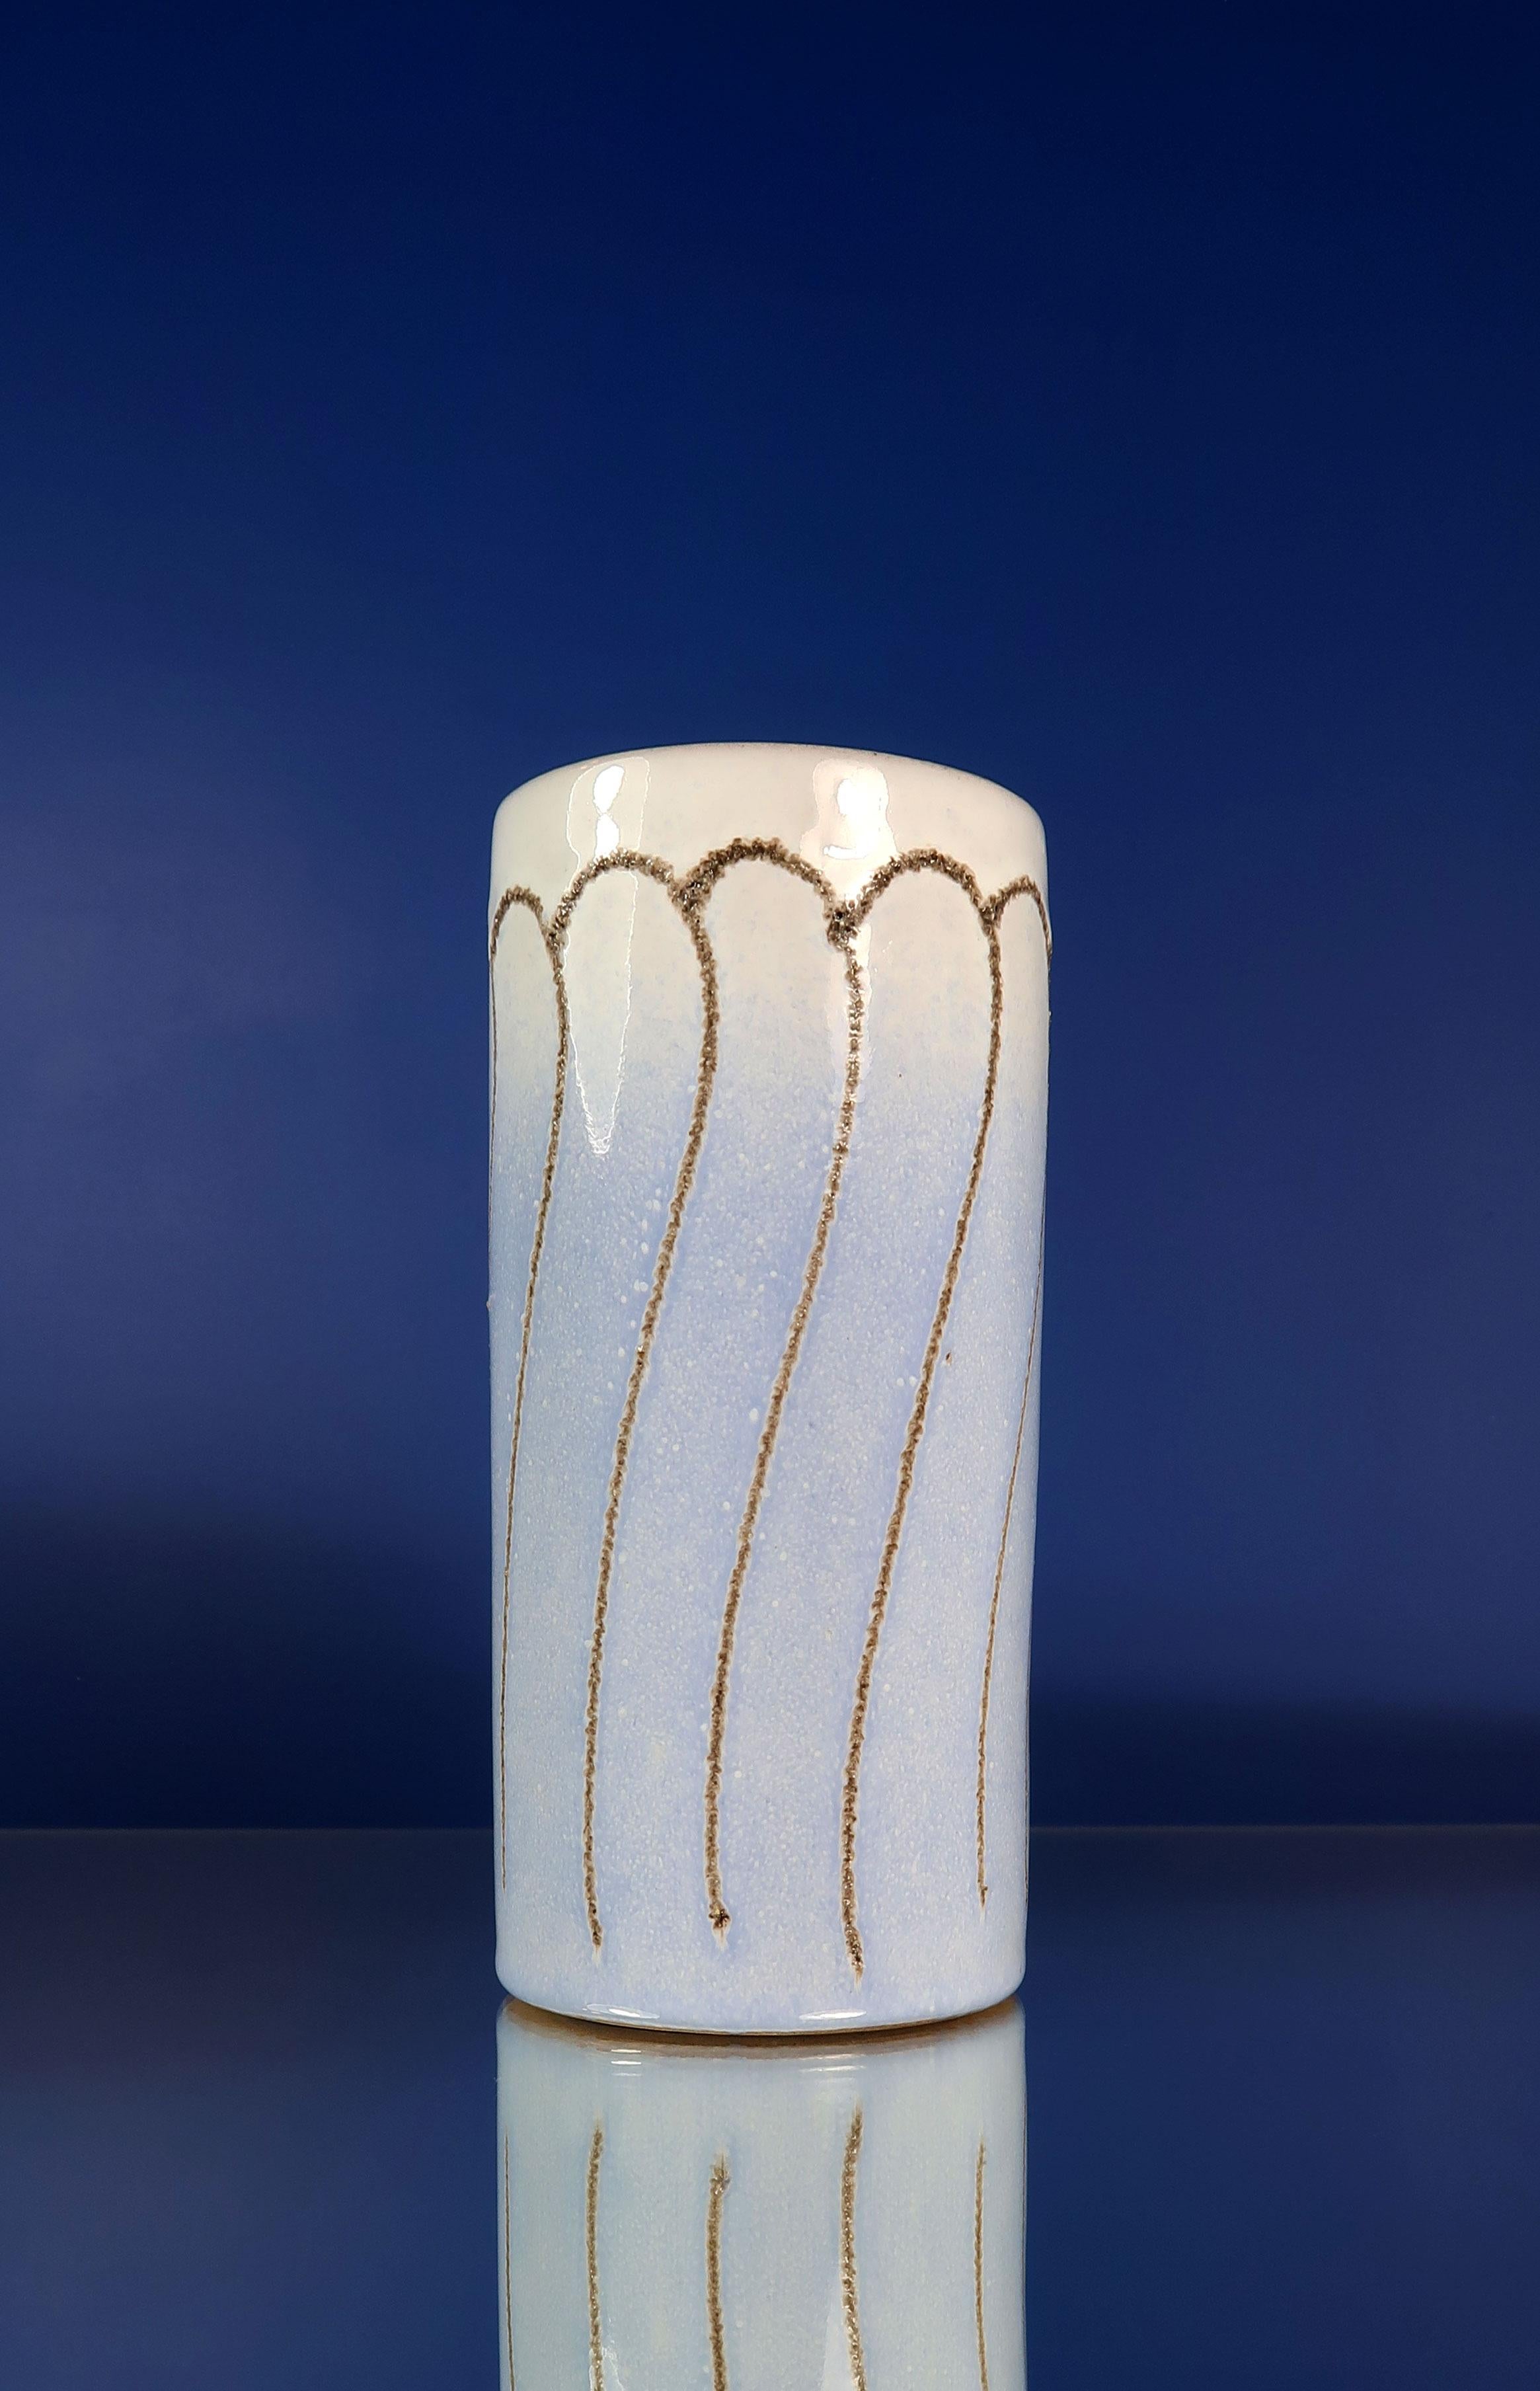 Cylinder shaped Mid-Century Modern handmade ceramic vase by East German manufacturer Strehla. Greyish brown vertical relief lines with an organic swirl. White glazed top gradually turning light blue down the vase. Brown glaze on the inside. Stamped